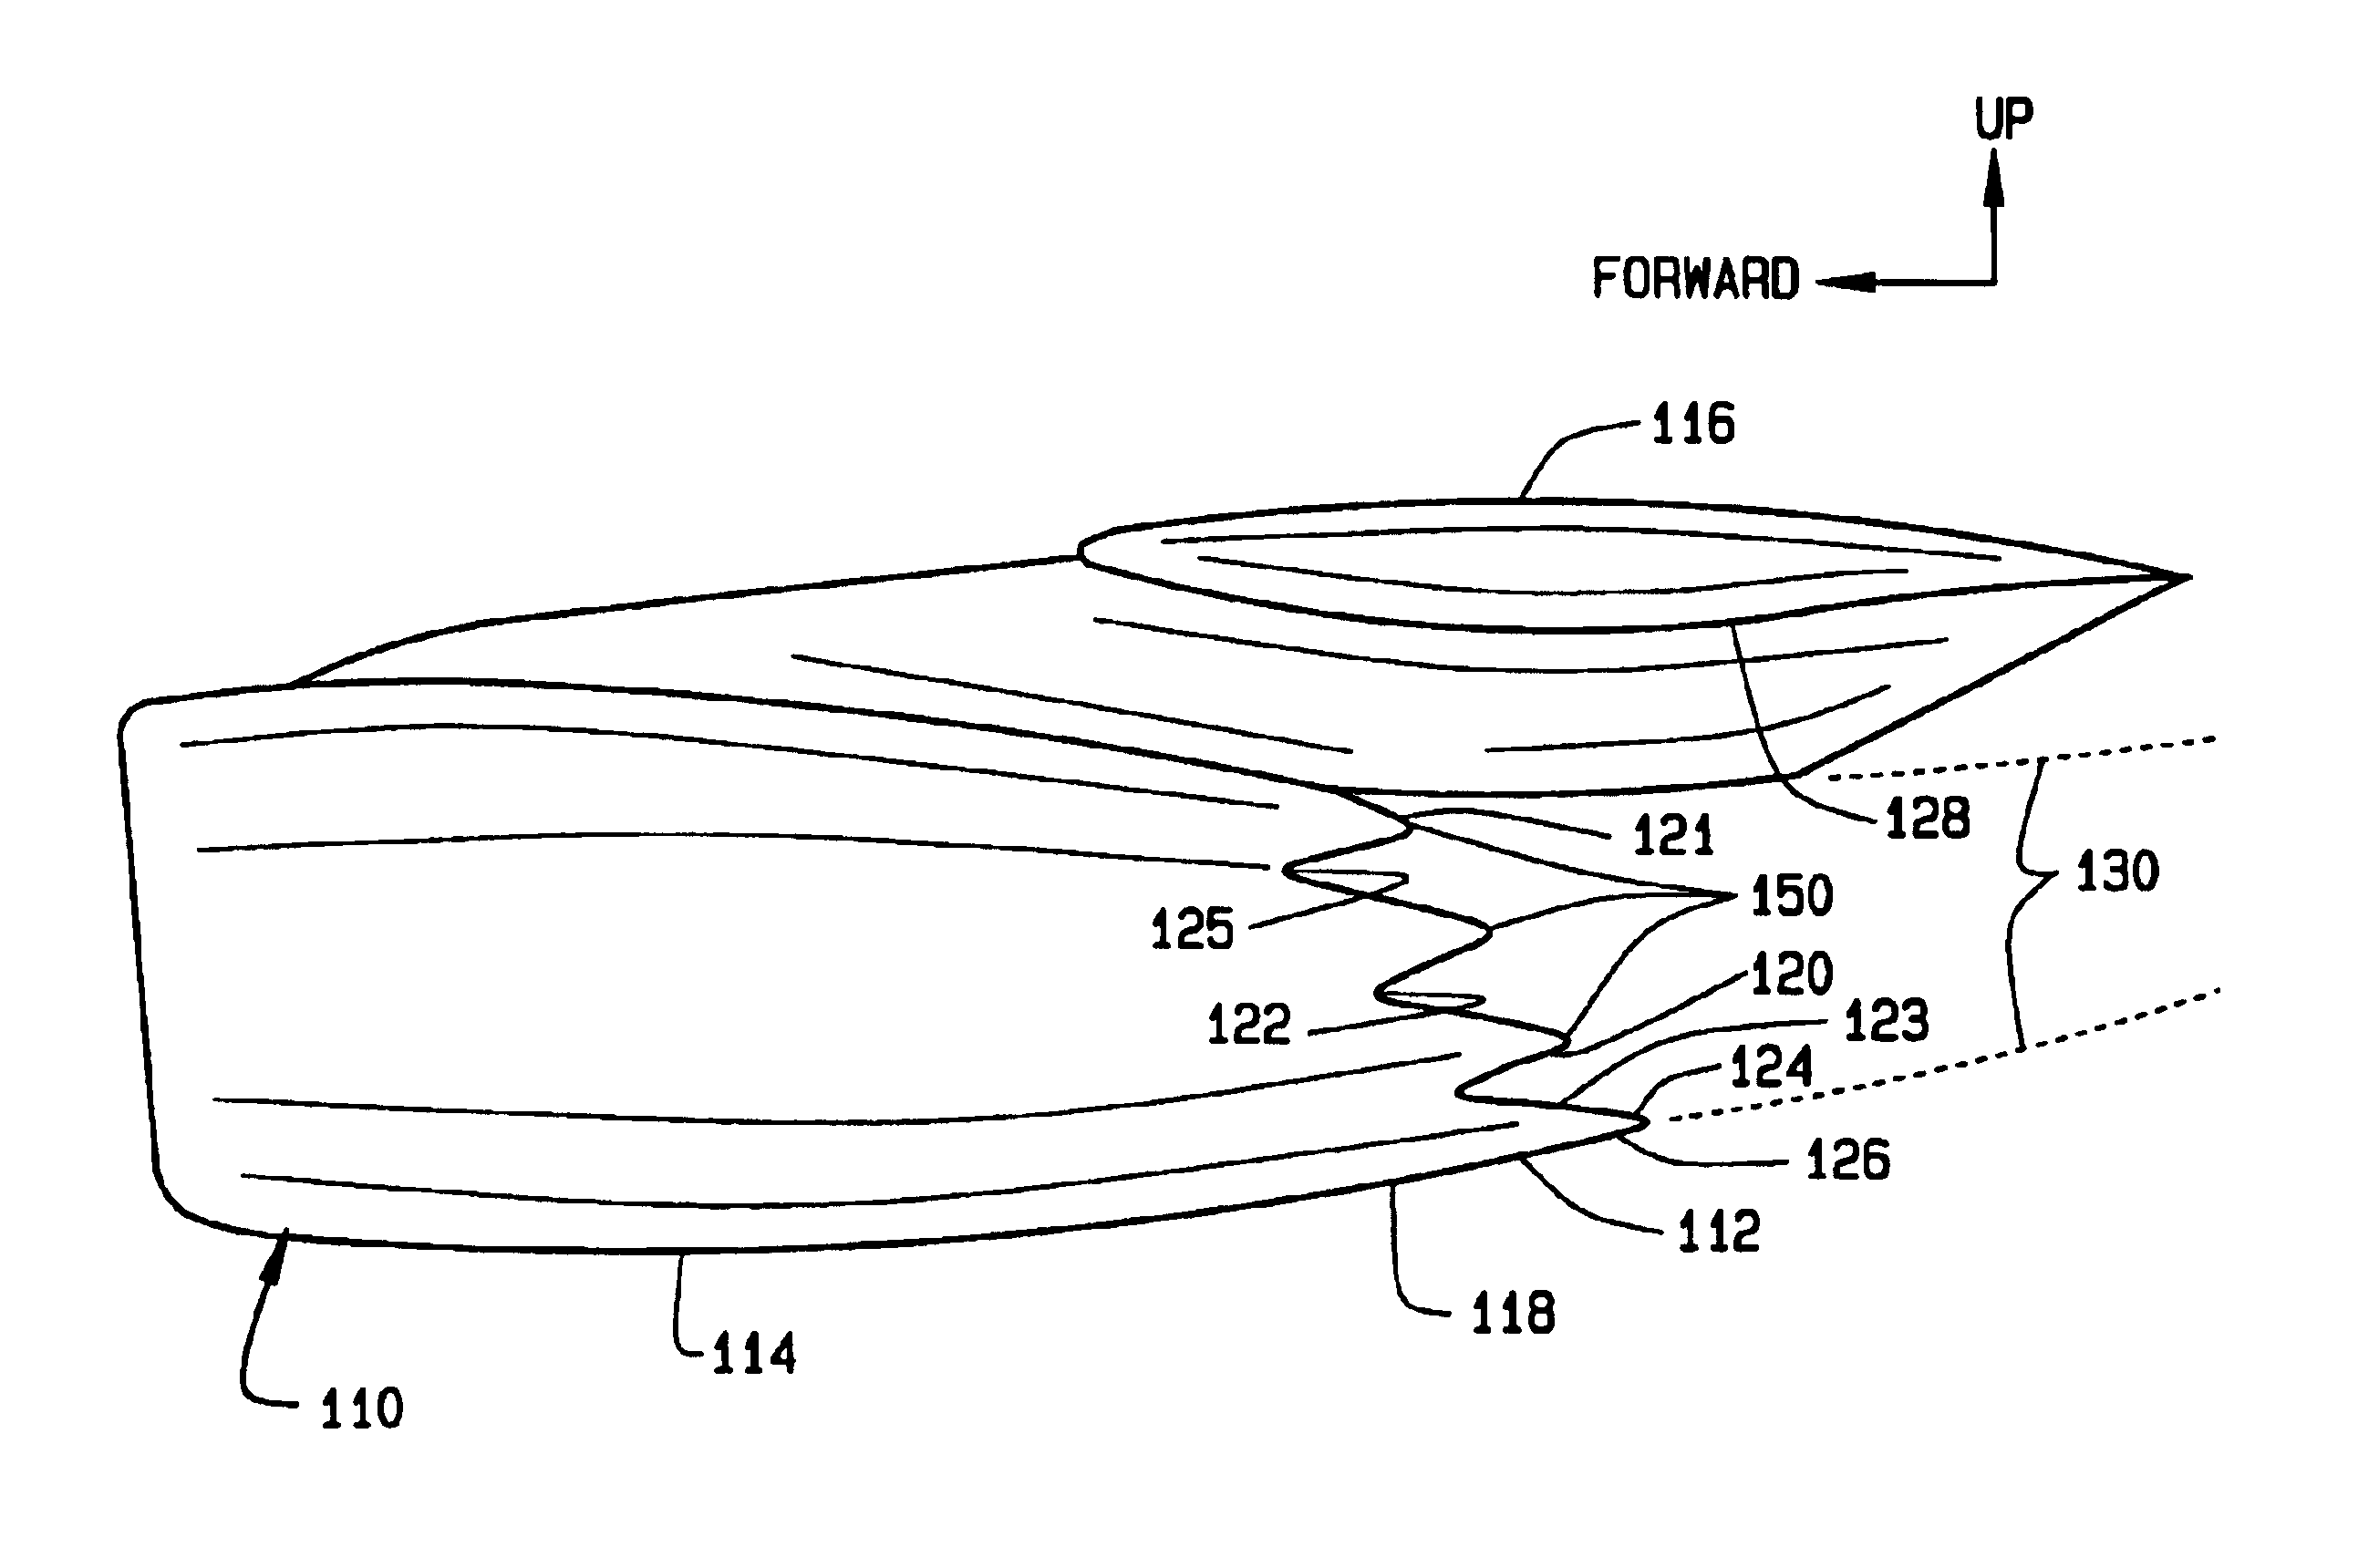 Scarf nozzle for a jet engine and method of using the same